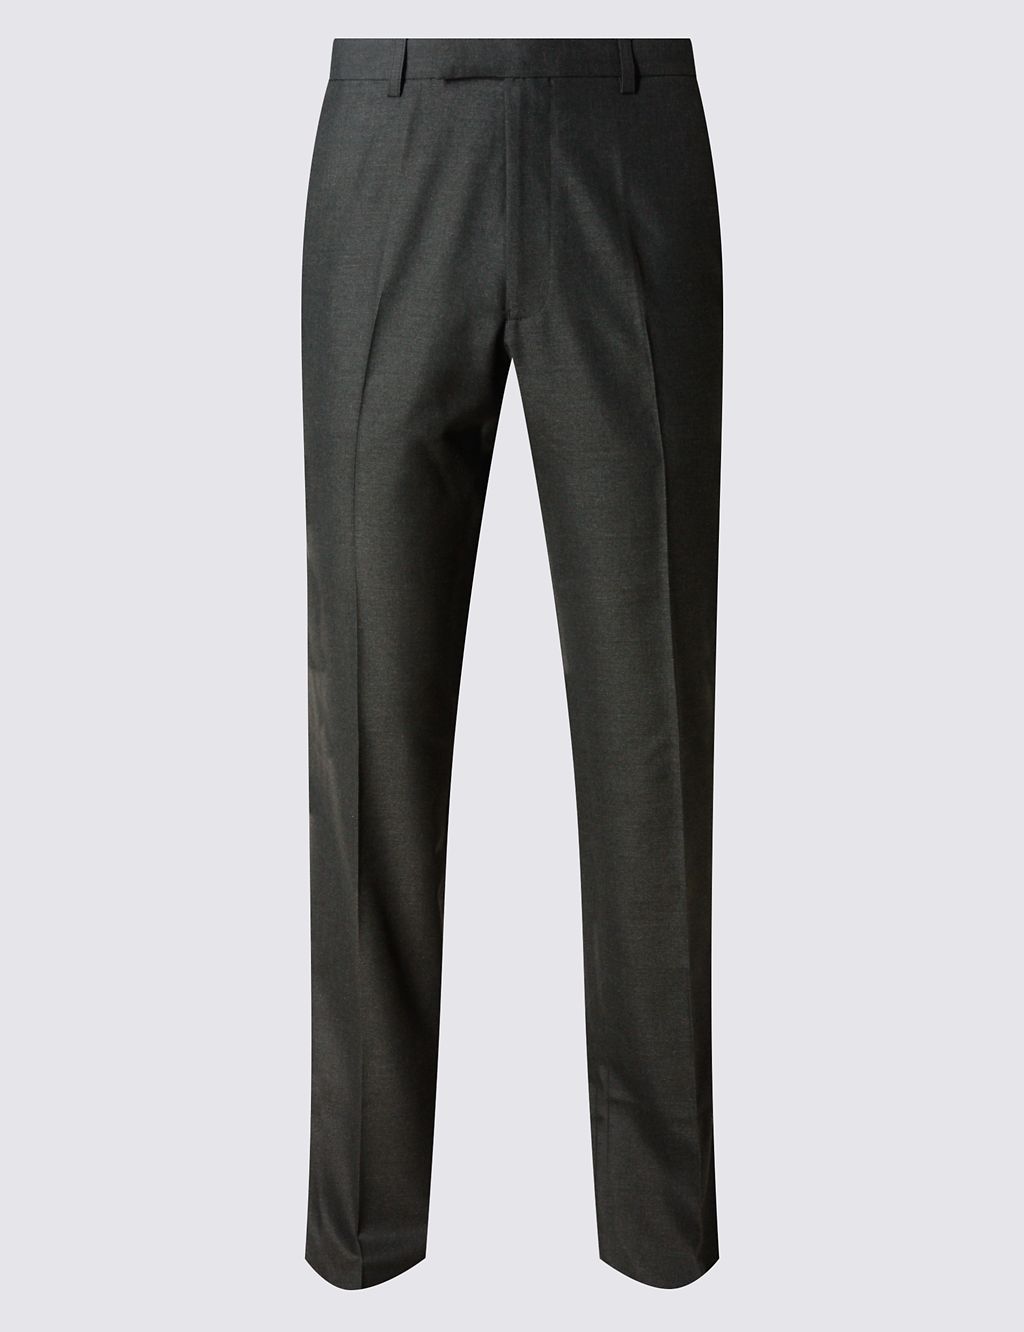 Charcoal Tailored Fit Trousers 1 of 6